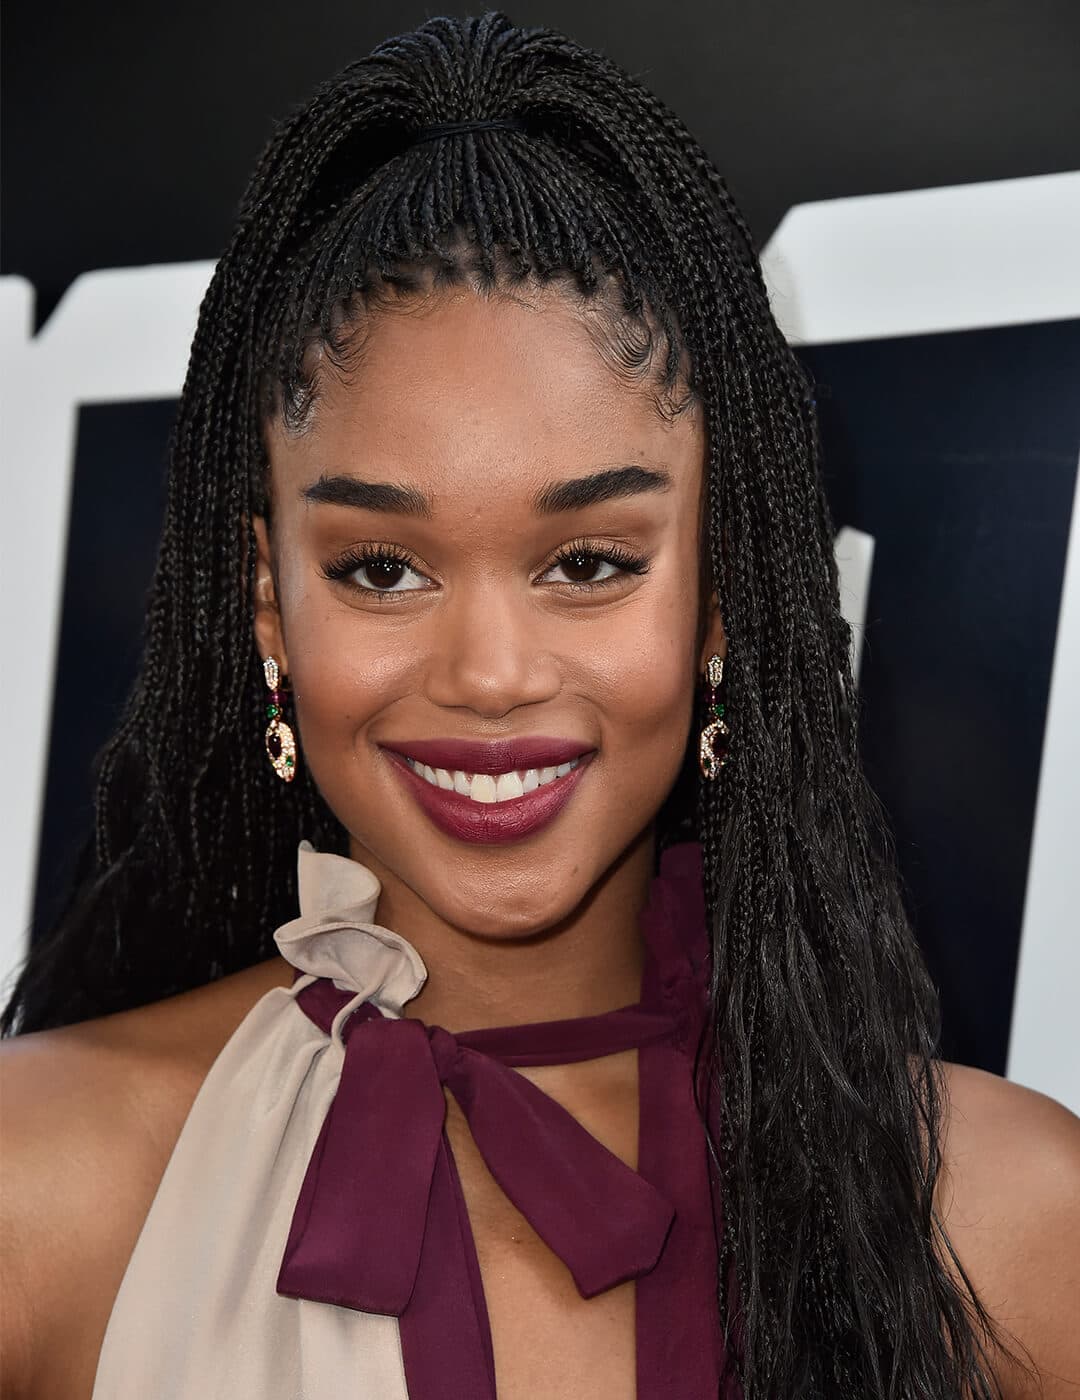 Laura Harrier in a maroon and cream dress and rocking a braided half updo hairstyle